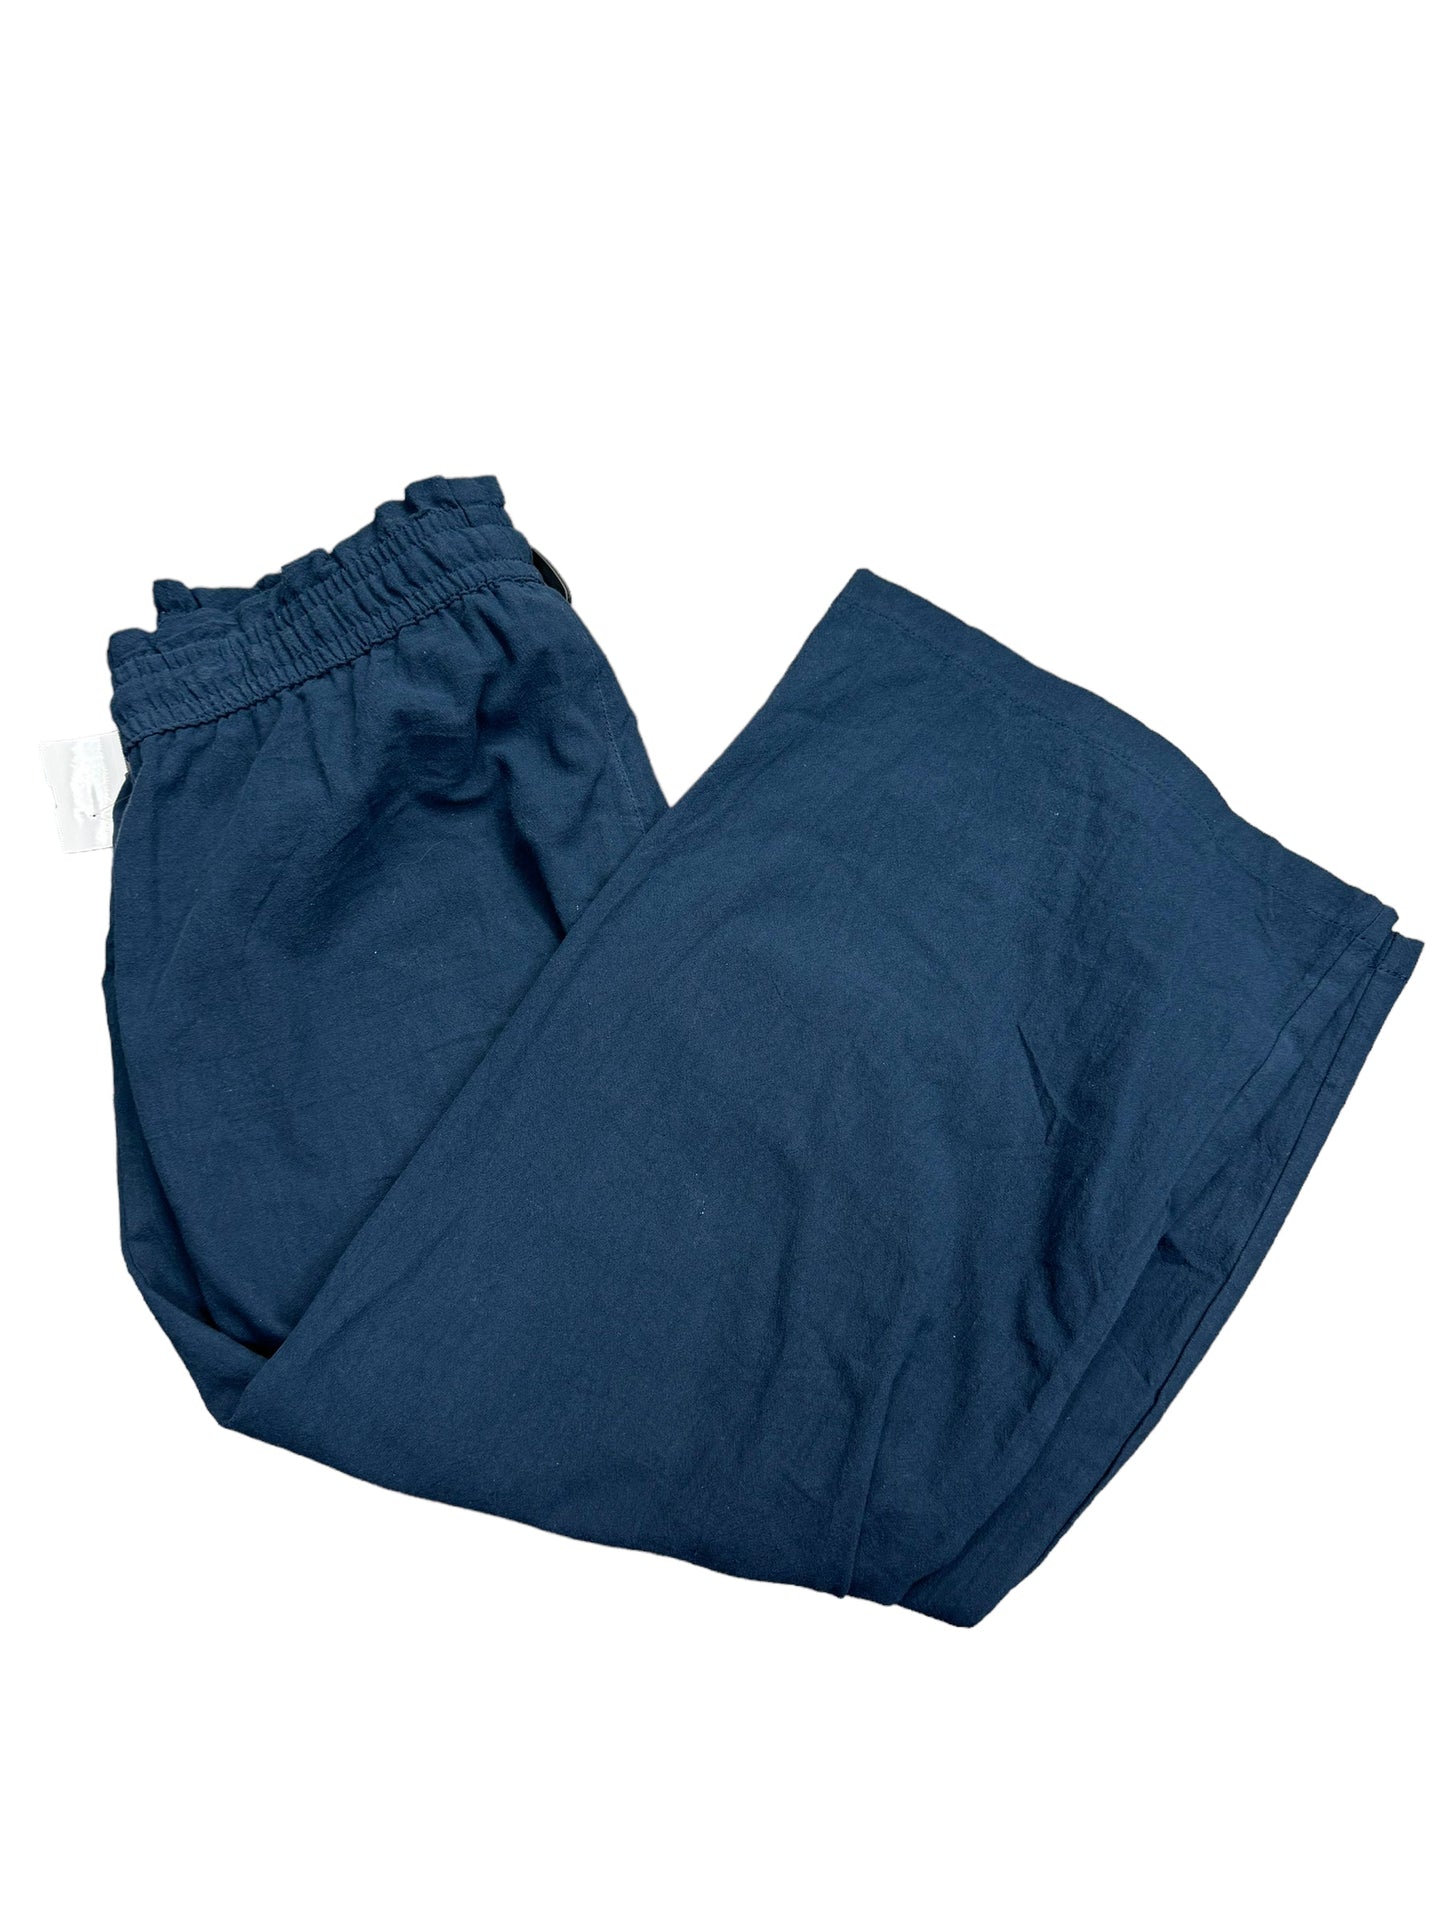 Pants Linen By Clothes Mentor  Size: 10